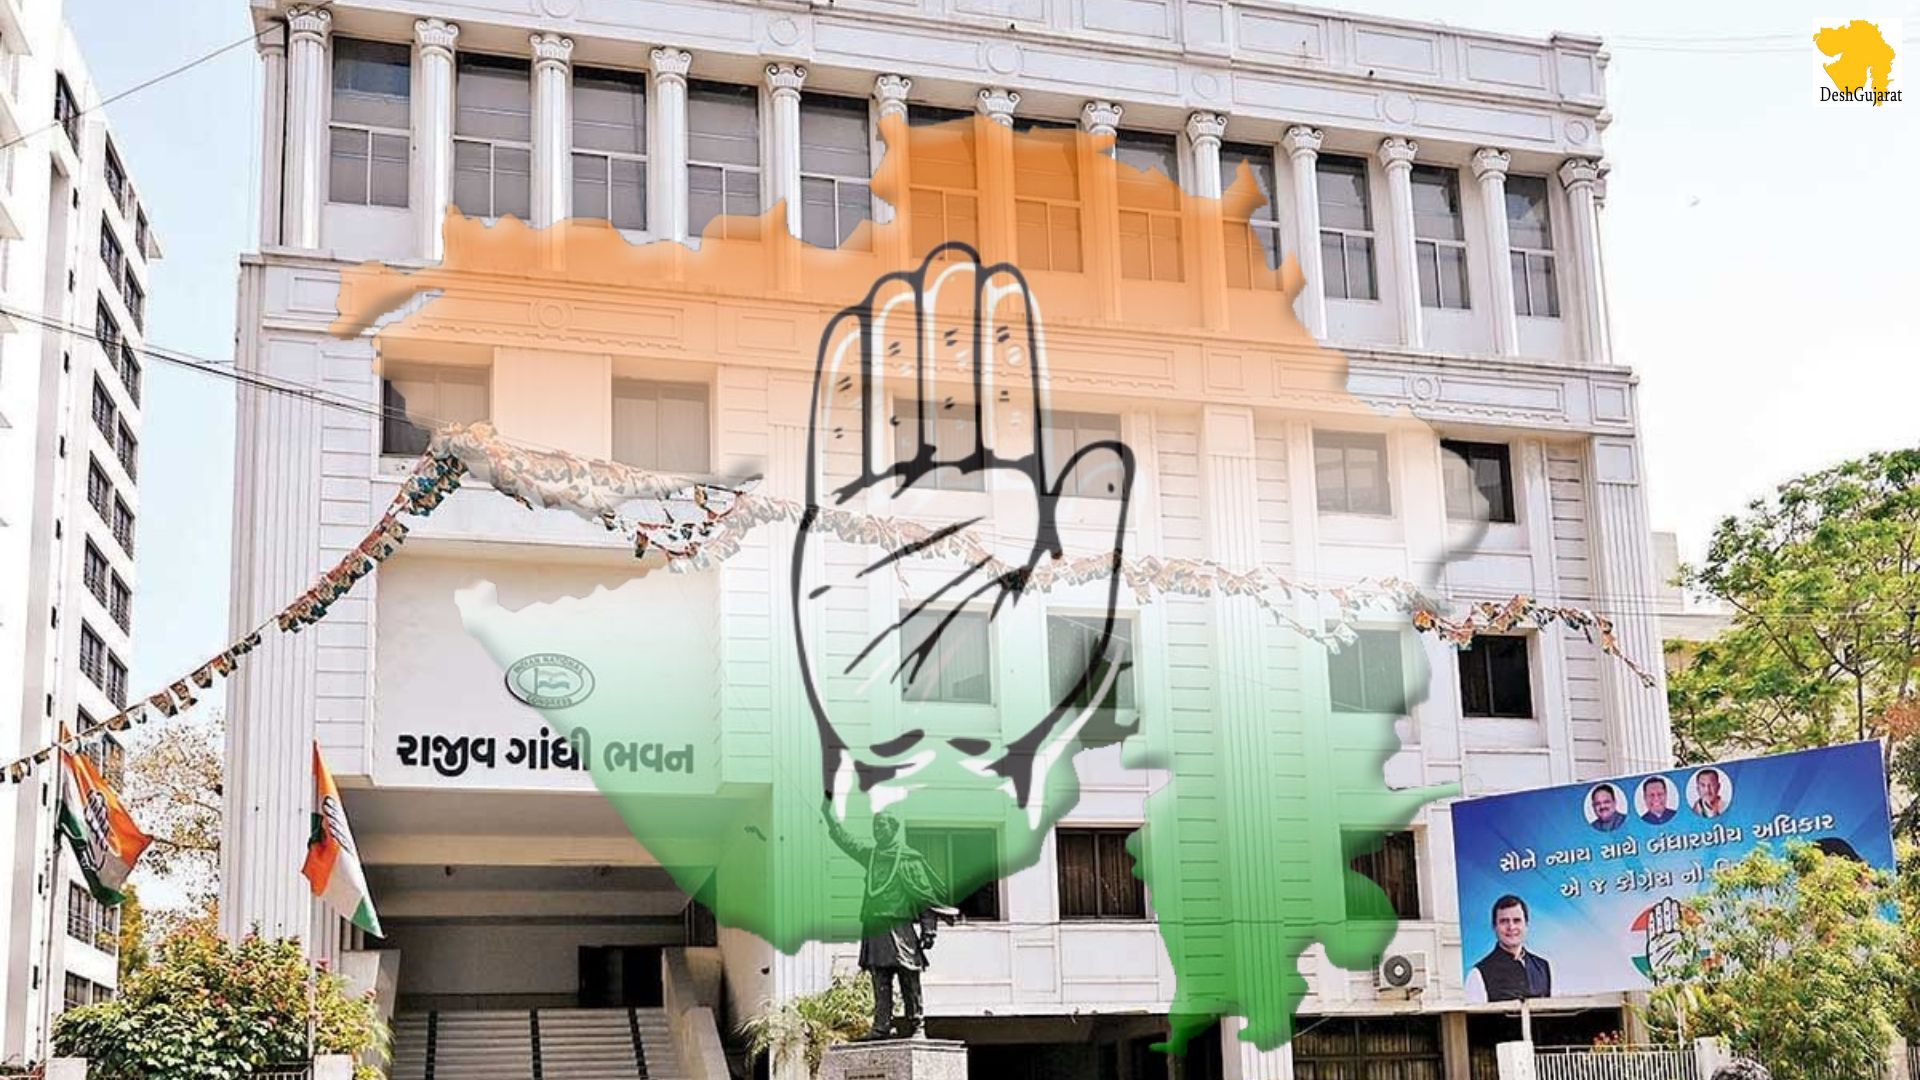 Gujarat Congress suspends 33 office bearers including former MLA and two district chiefs